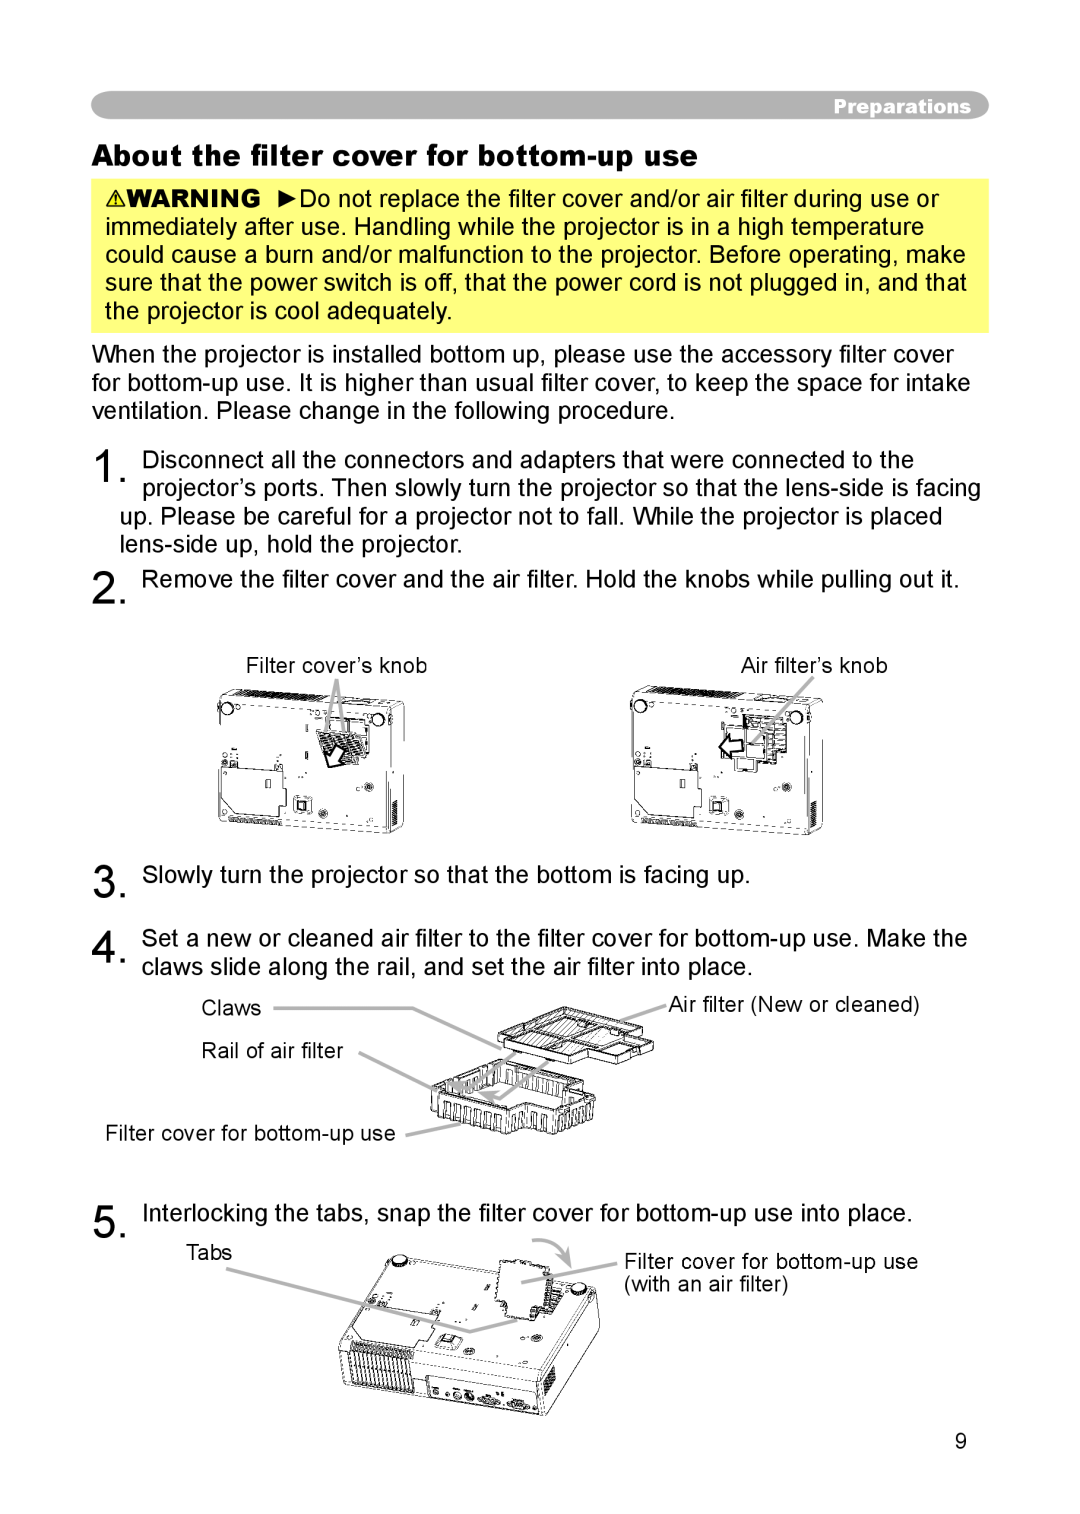 3M S15 manual About the ﬁlter cover for bottom-up use 